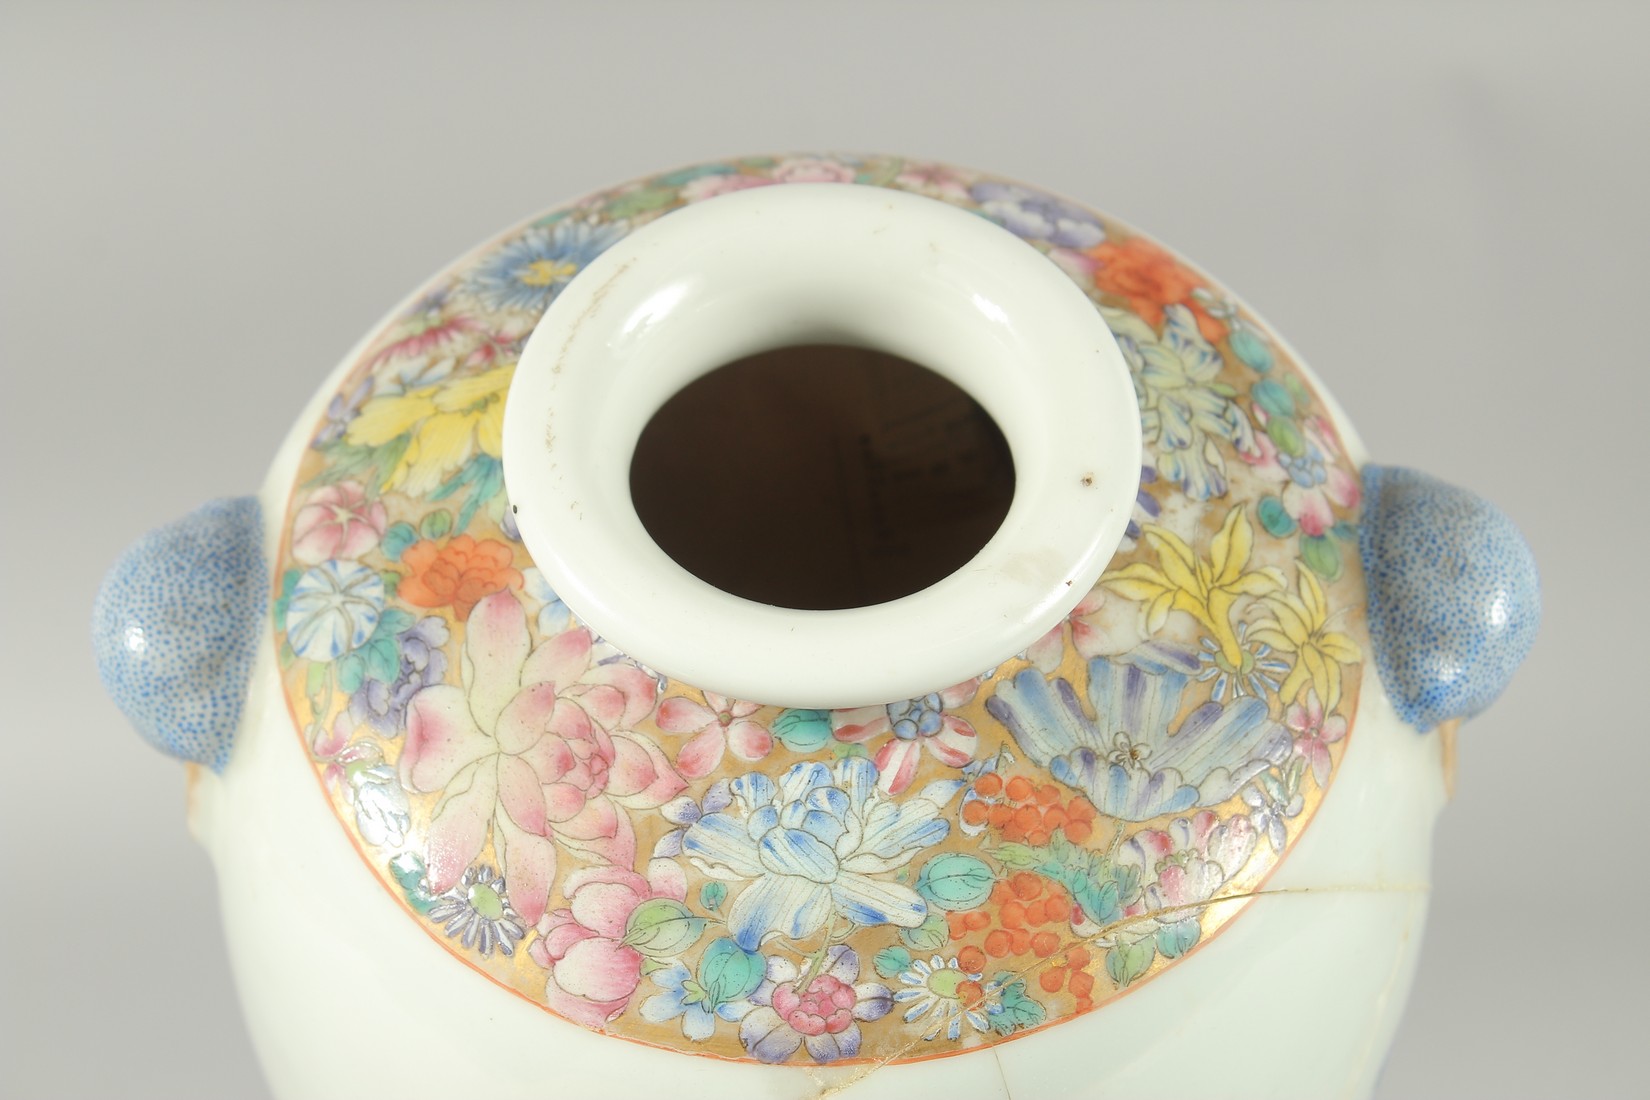 A CHINESE FAMILLE ROSE PORCELAIN VASE on hardwood stand, painted with exotic birds and native flora, - Image 5 of 7